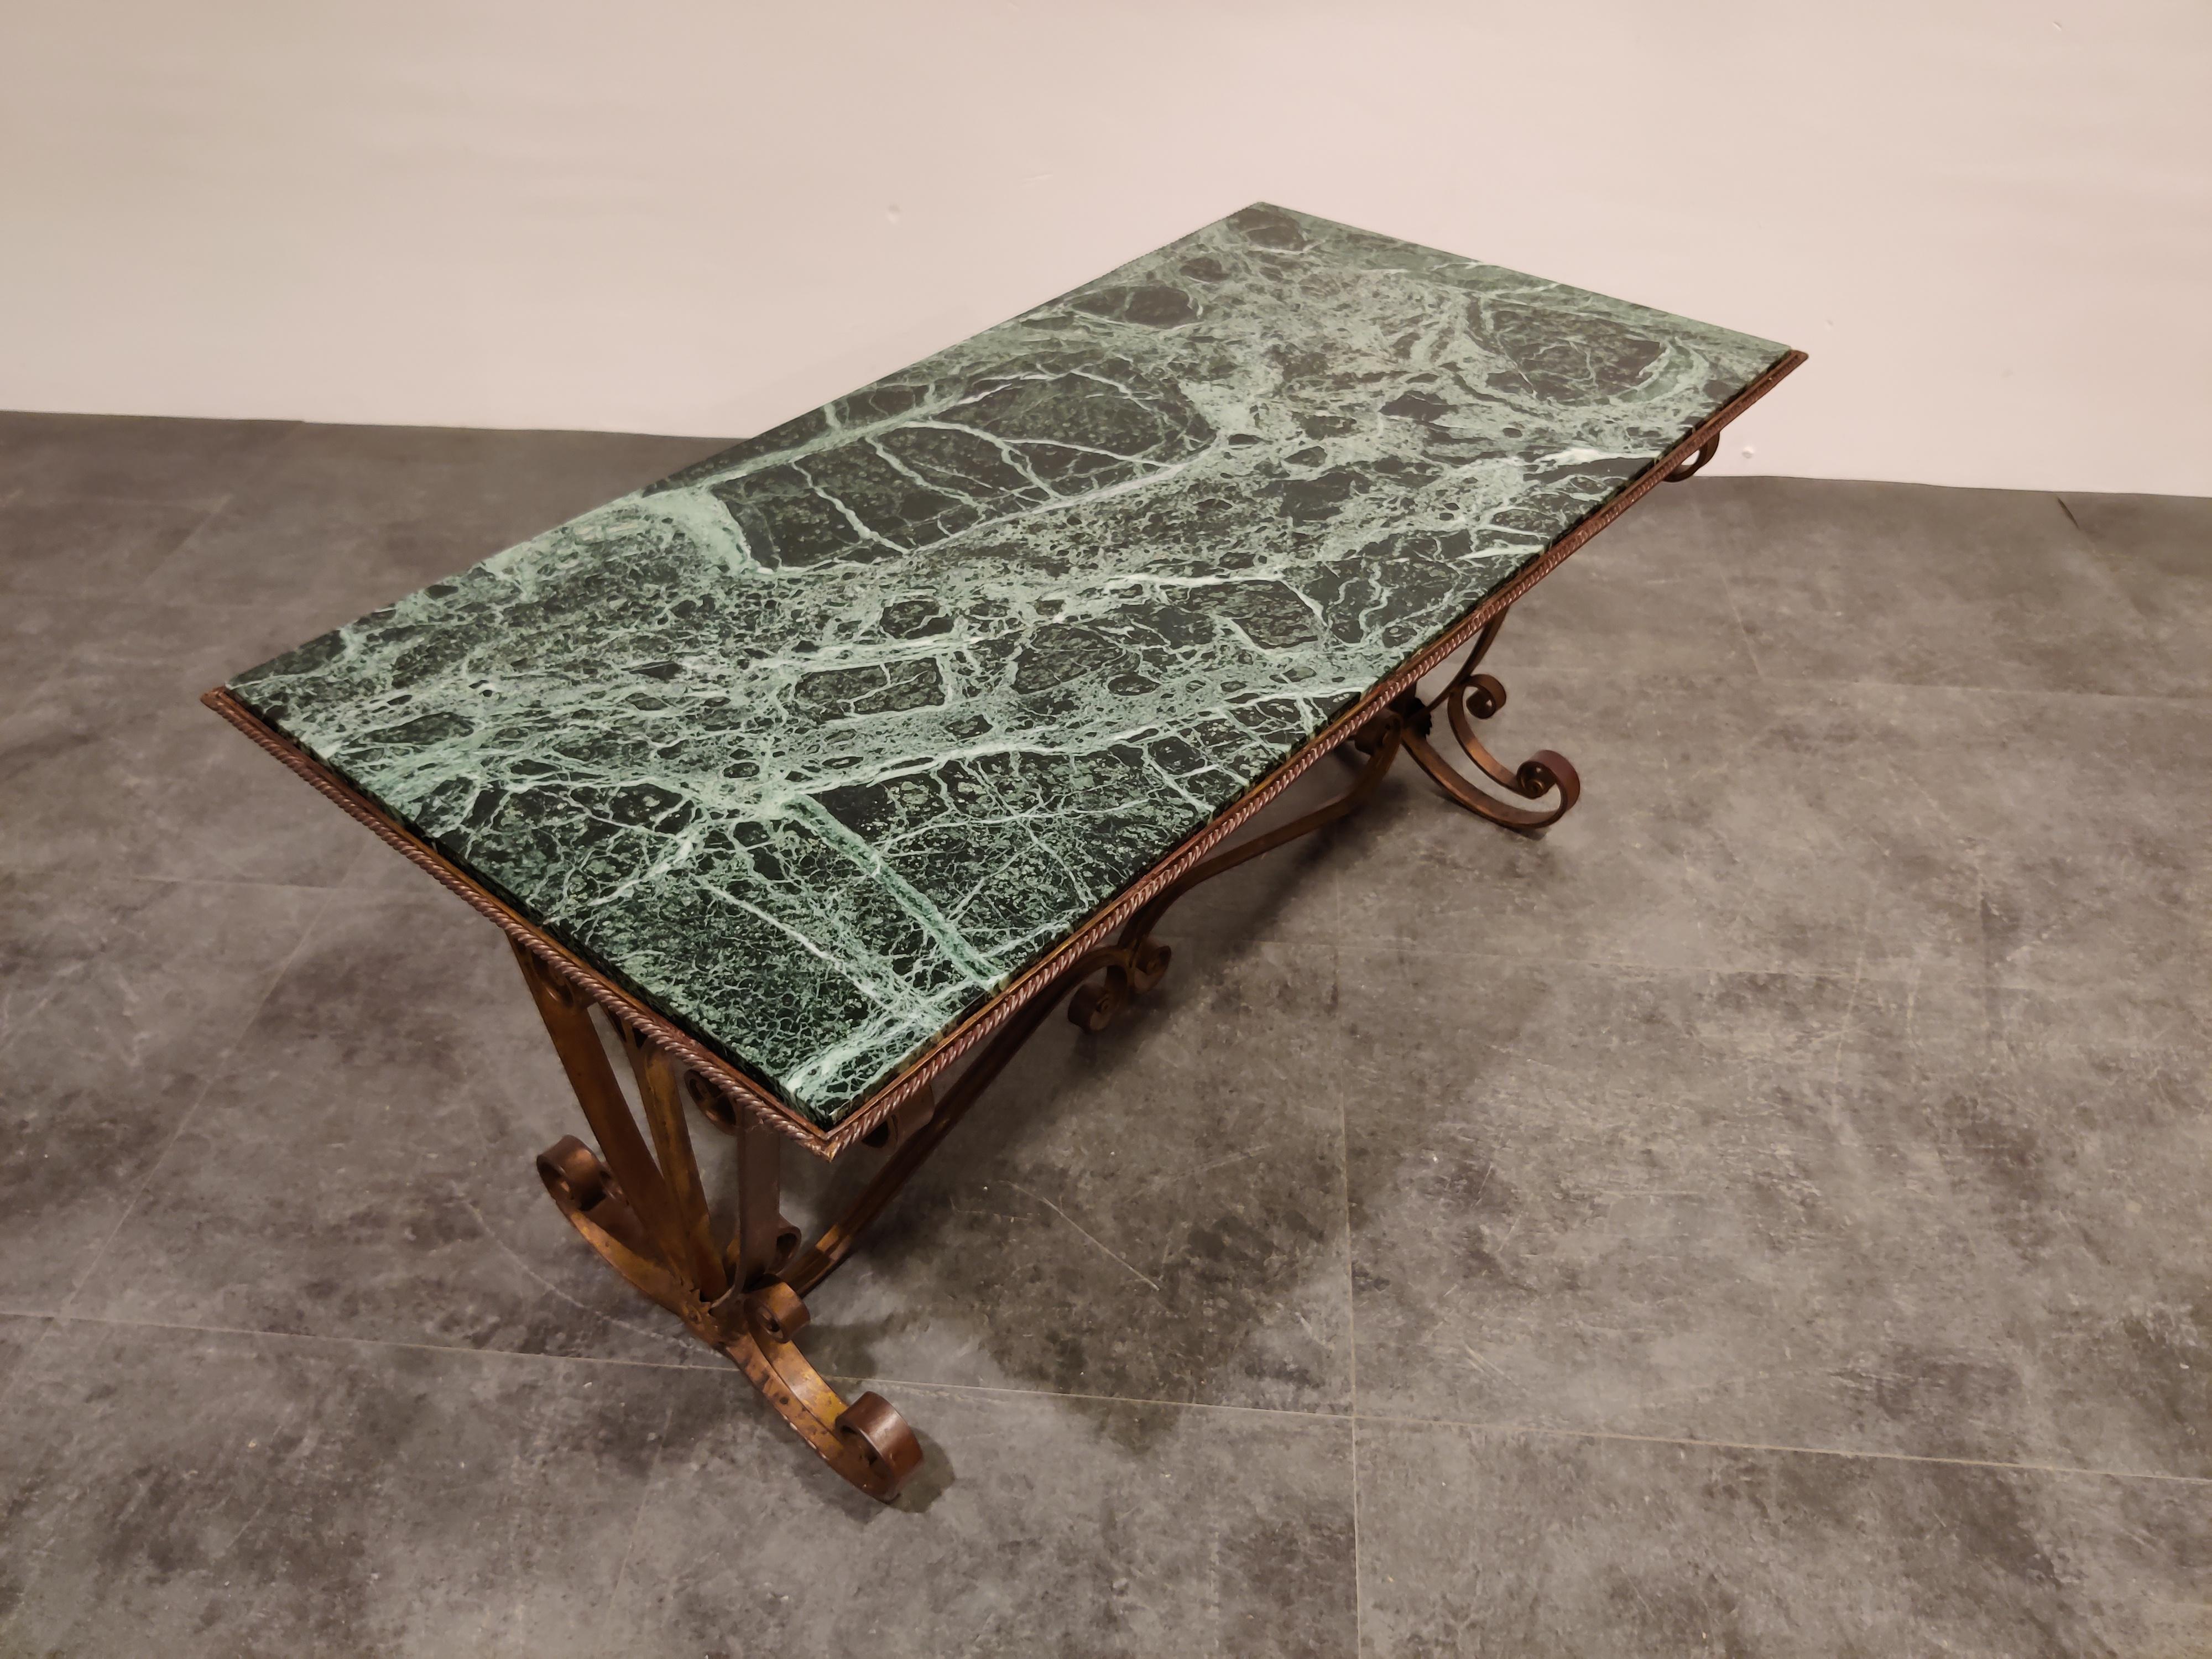 Exquisite midcentury wrought iron coffee table in the style of Raymond Subes.

Very well made with beautiful details and a perfect dark green vained marble top.

The combination of materials and craftsmanship creates this beautiful elegant